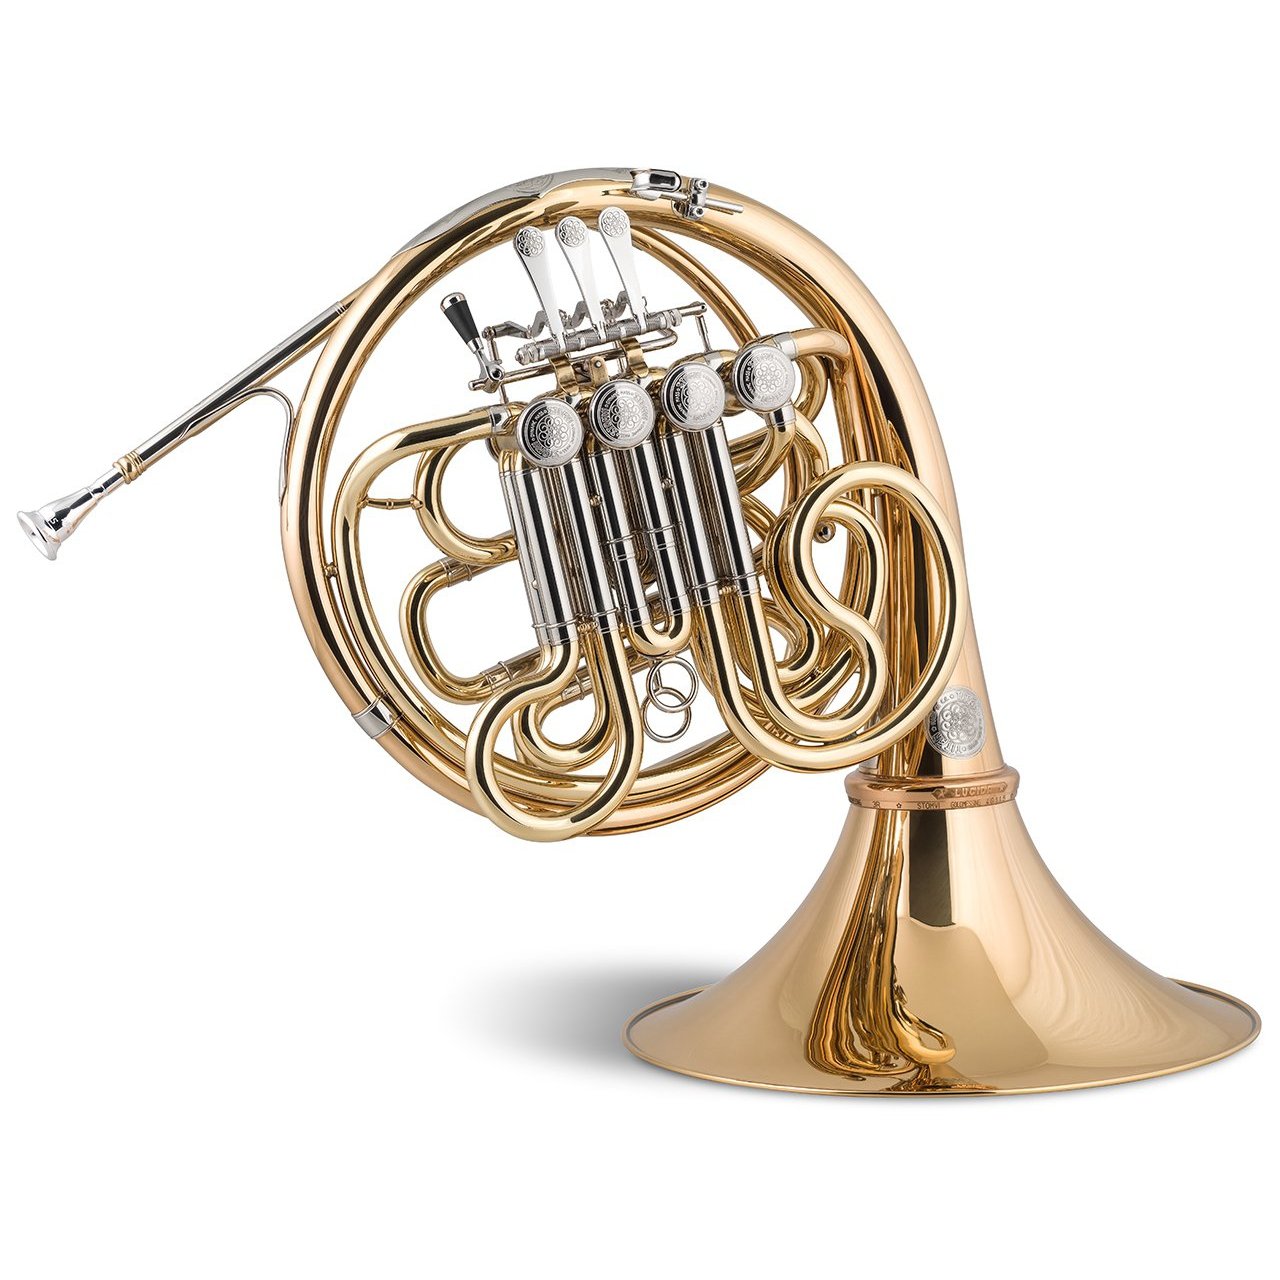 Stomvi - TitÃ¡n SEIS Bb/F Double Gold Brass French Horns (Geyer System)-French Horn-Stomvi-Music Elements